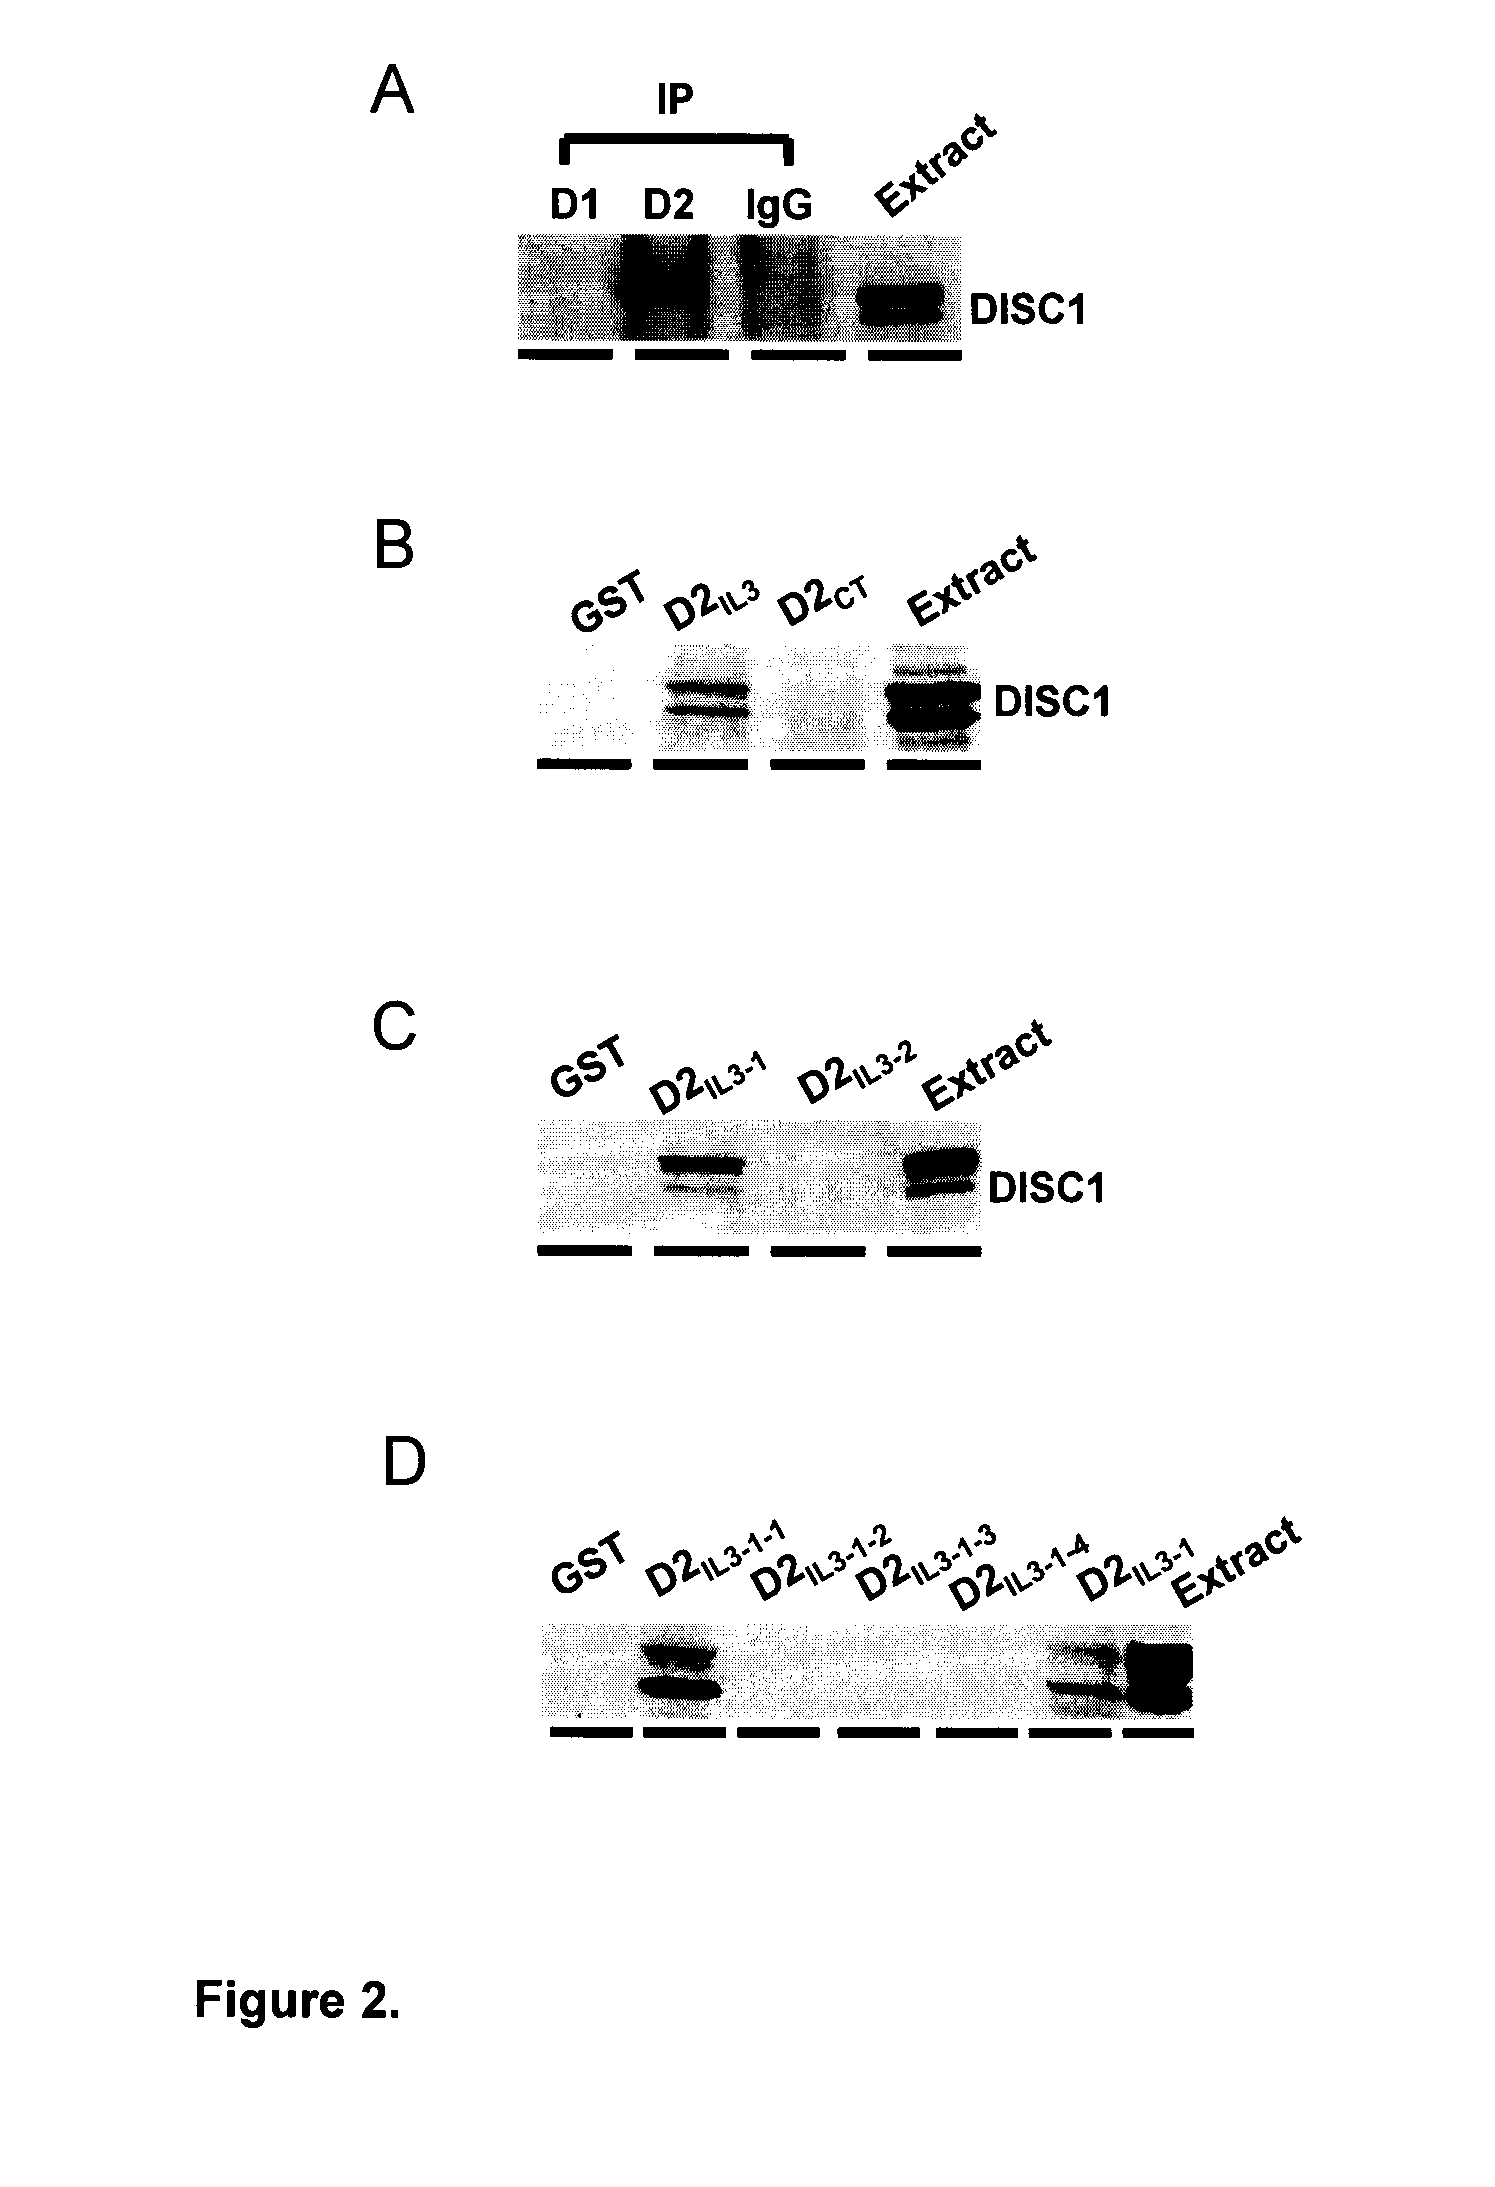 Dopamine d2 receptor-disc1 interaction, compositions and methods for modulating same